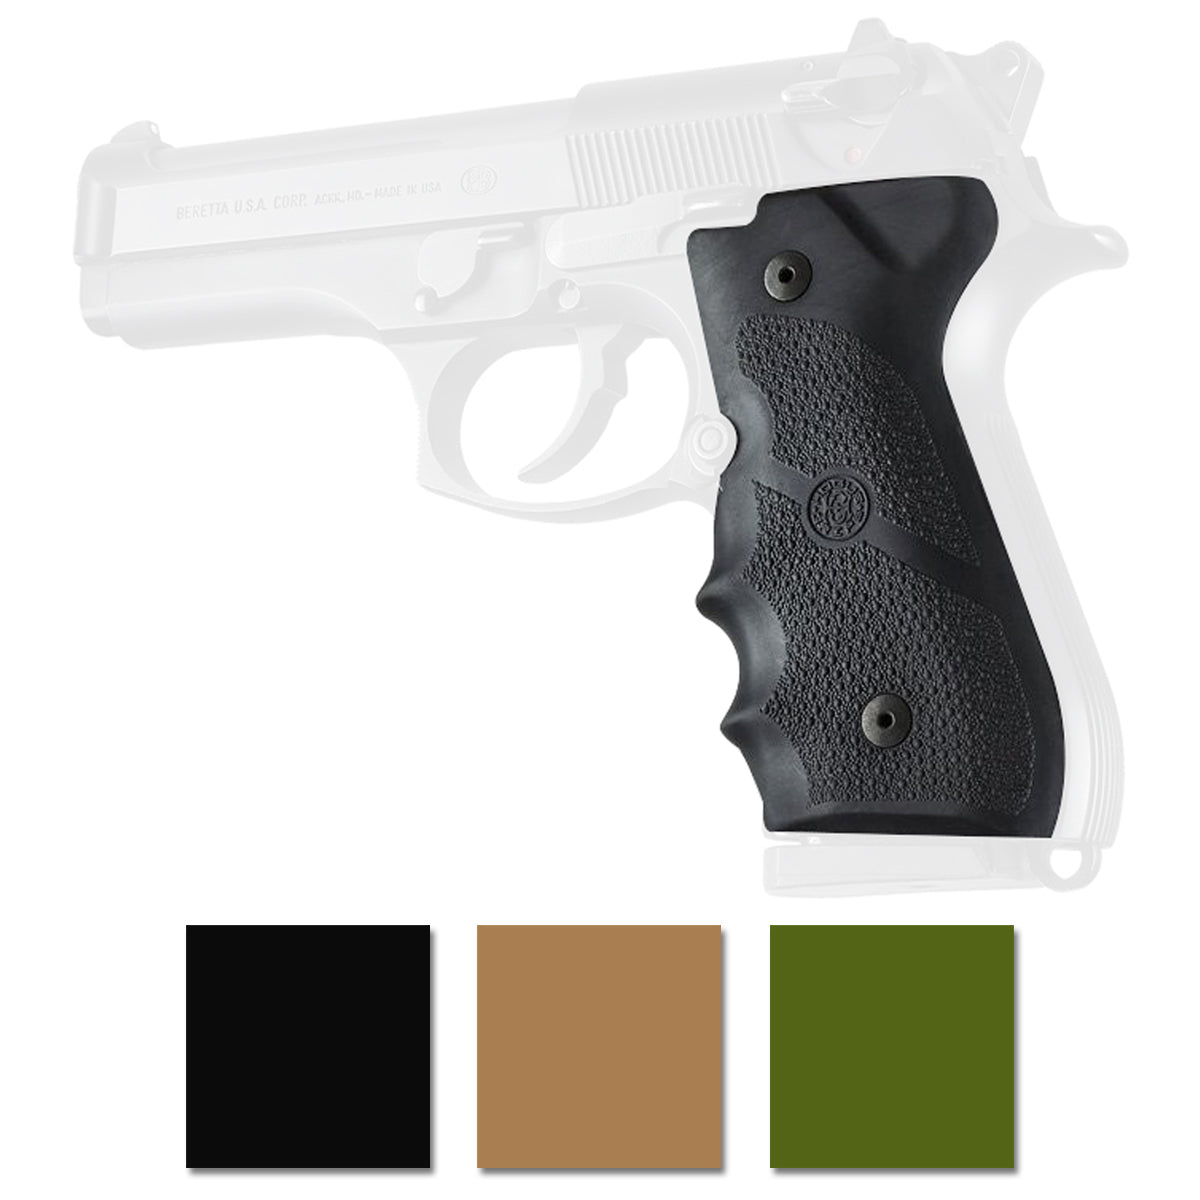 Hogue Beretta 92/96 Series Rubber Grip with Finger Grooves Hogue